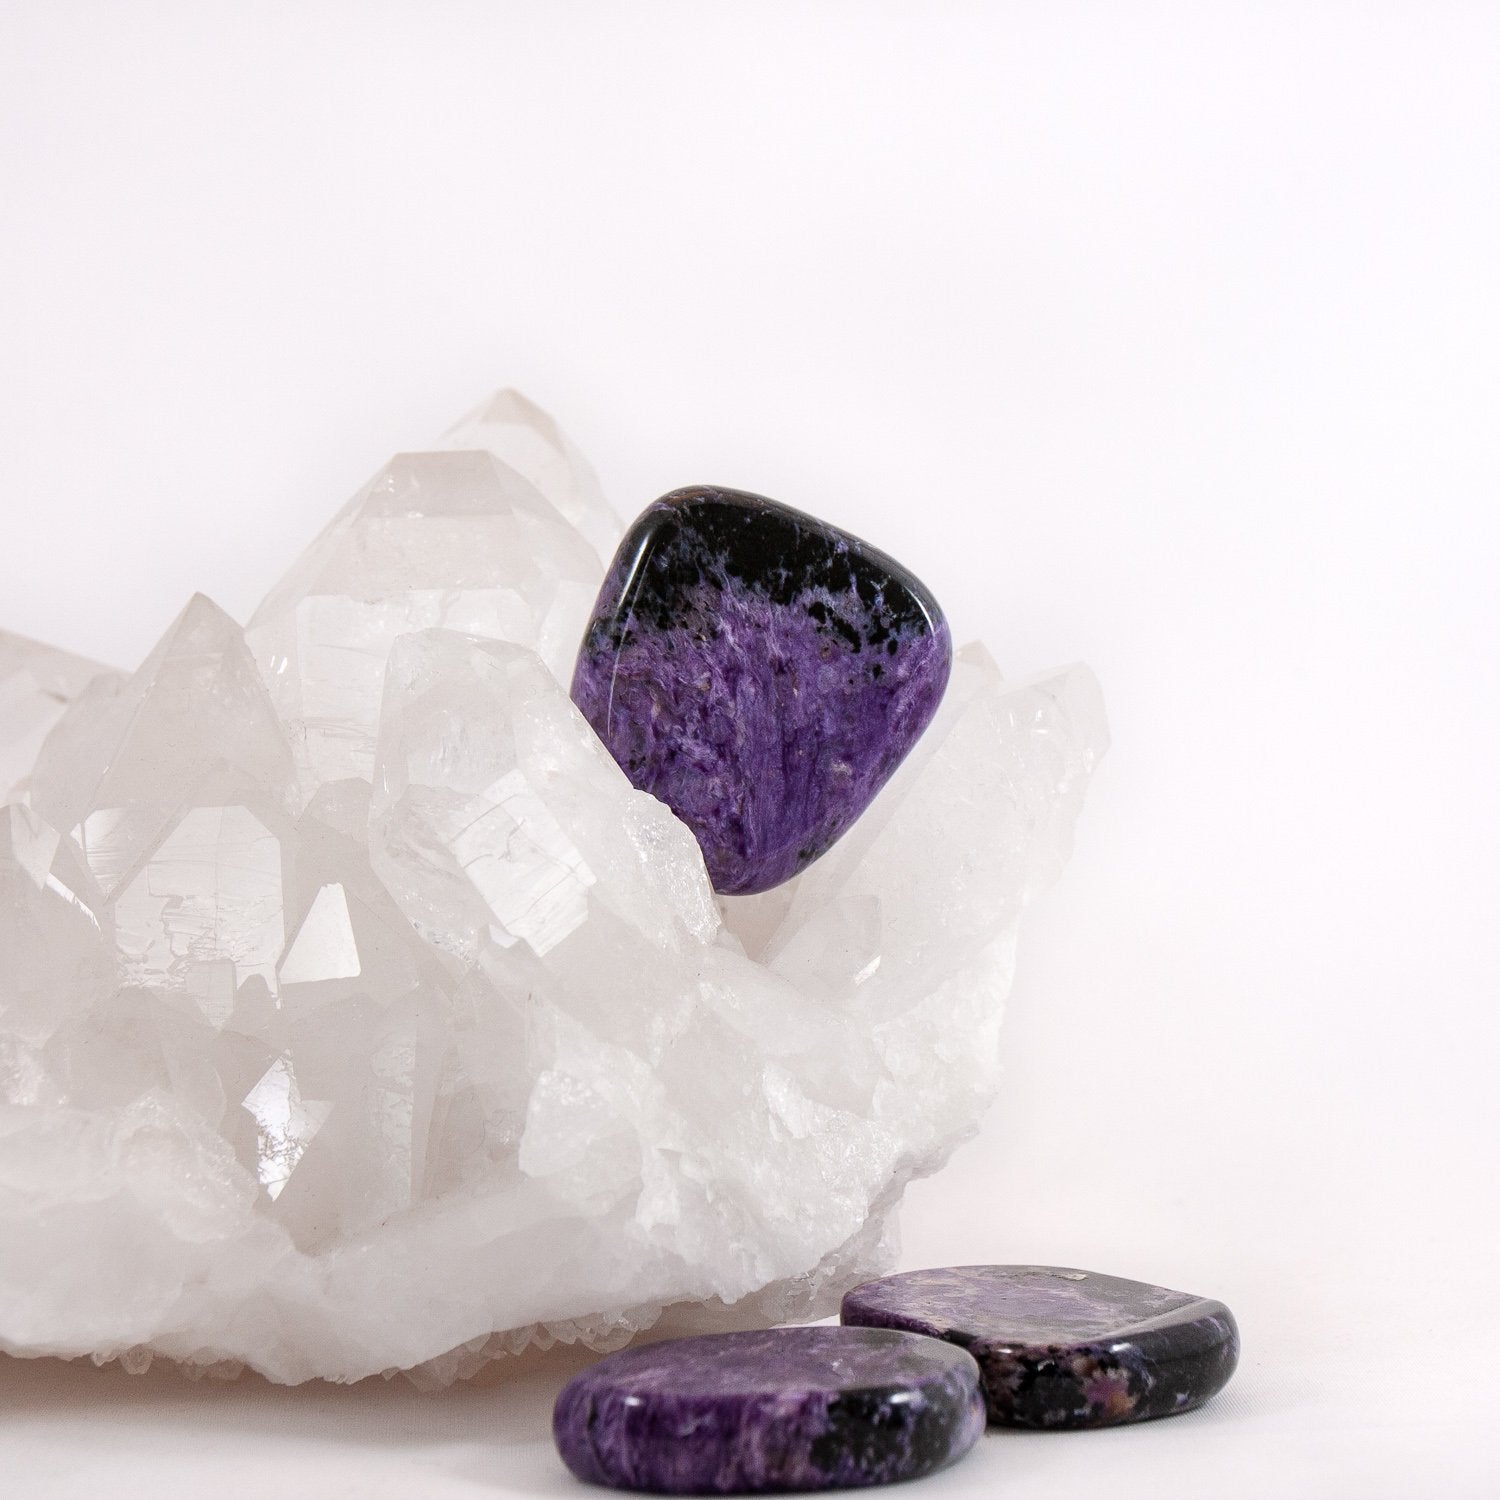 Charoite flat stones. One sitting on quartz cluster, two lying in front of it.